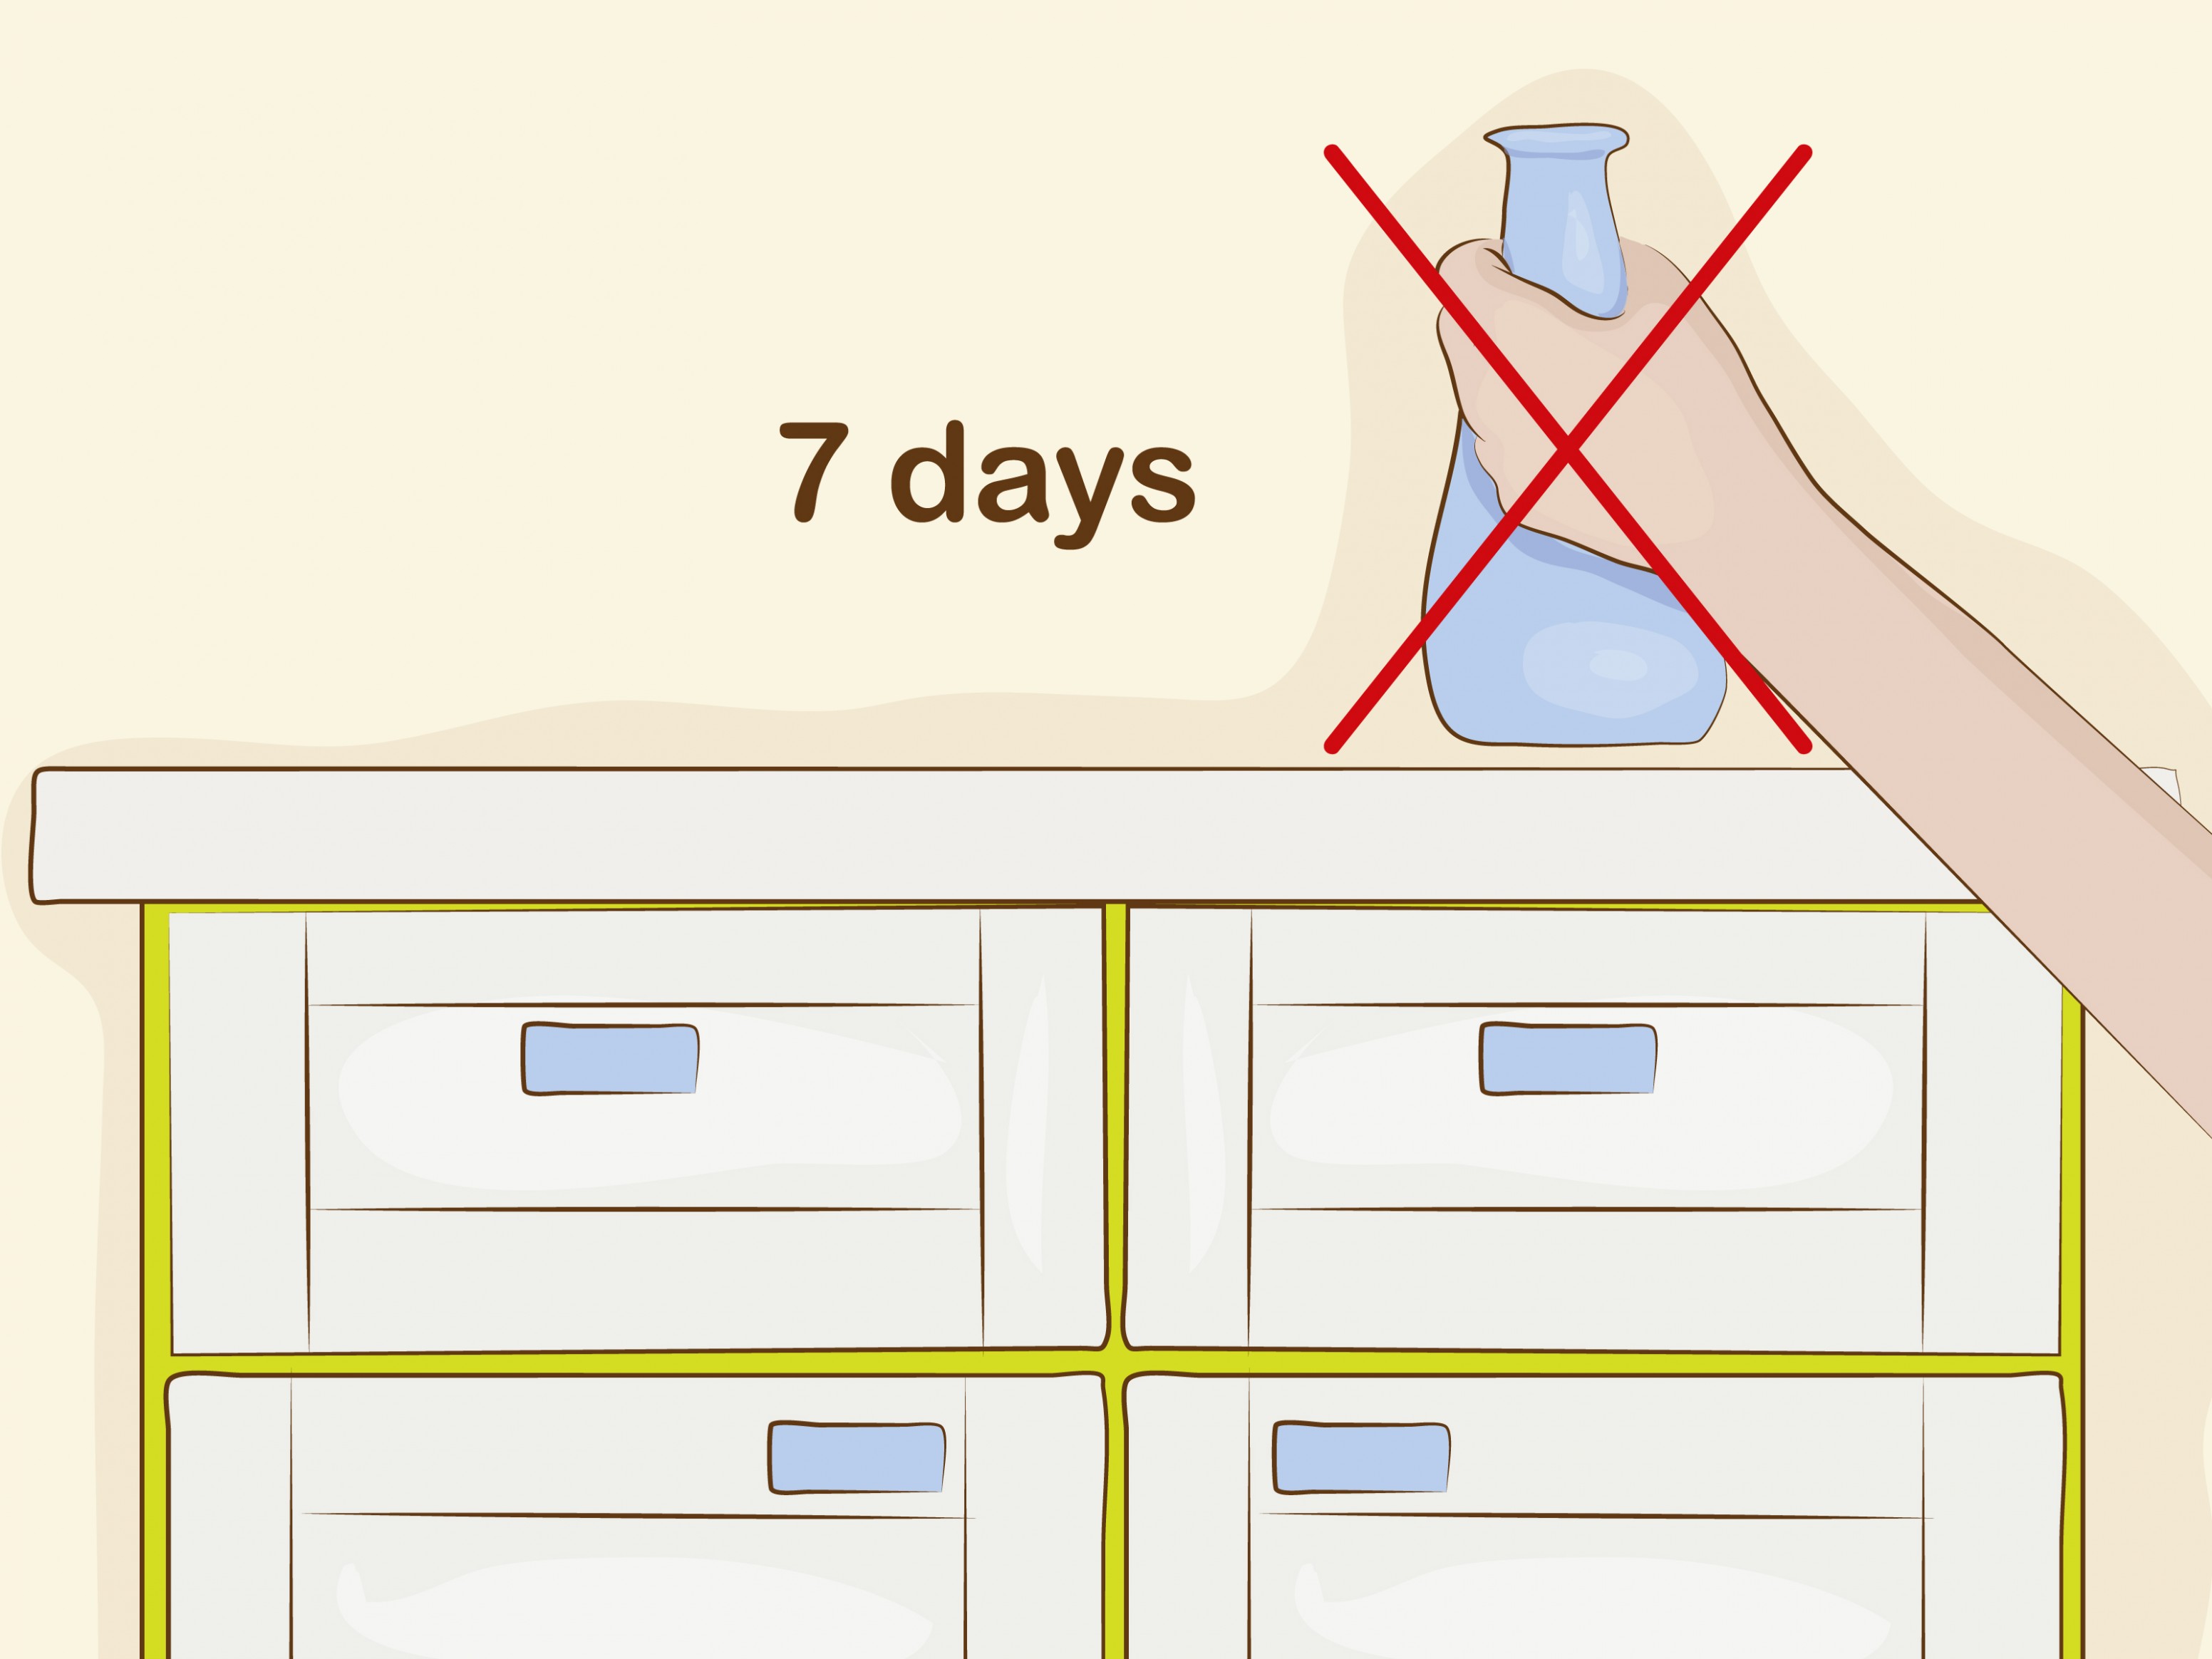 How To Paint Laminate Furniture: 9 Steps (with Pictures) Can You Paint Chalk Paint On Melamine